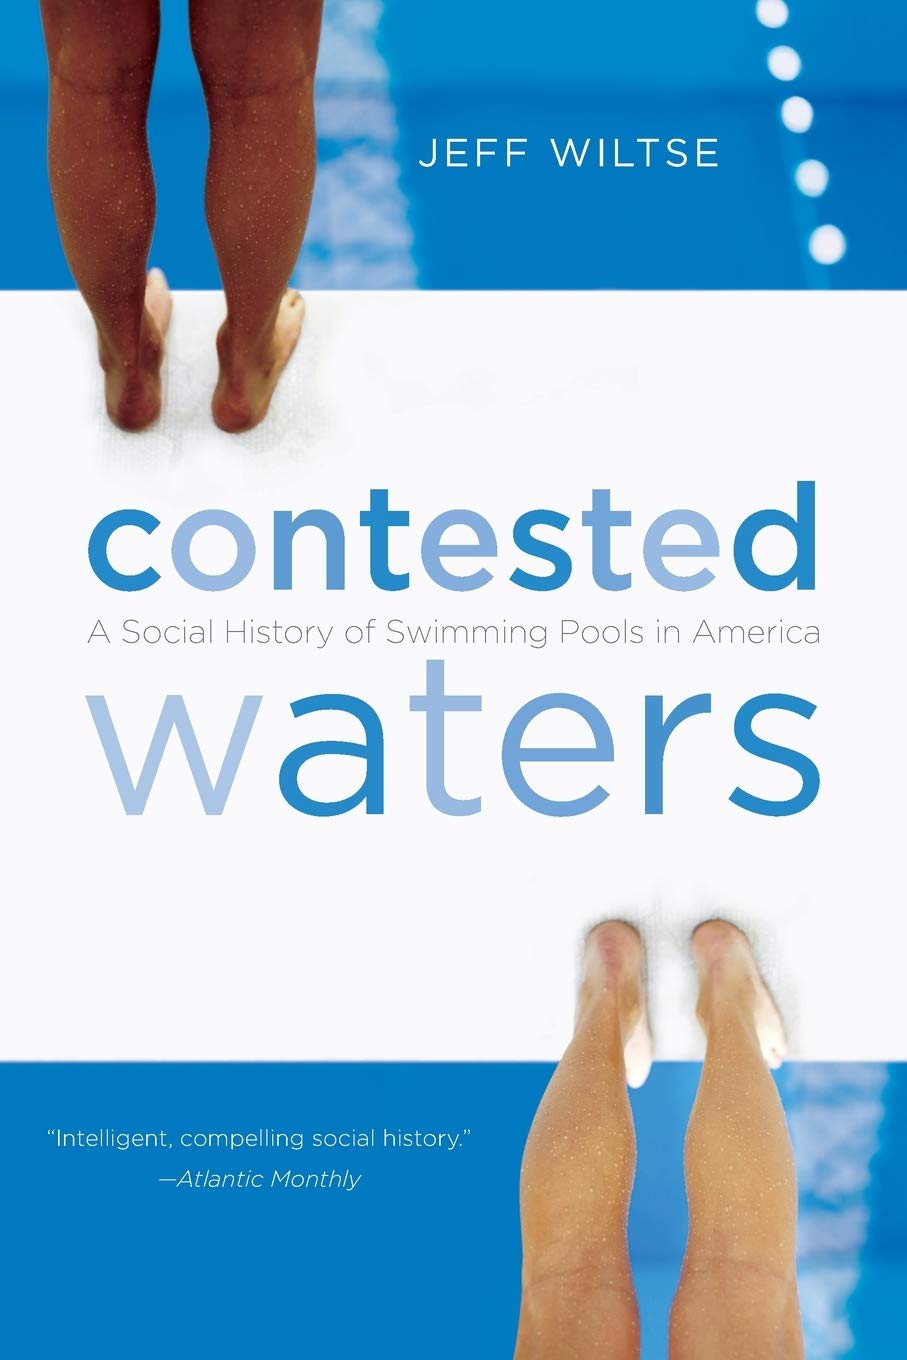 Jeff Wiltse's Contested Waters [Book Cover]